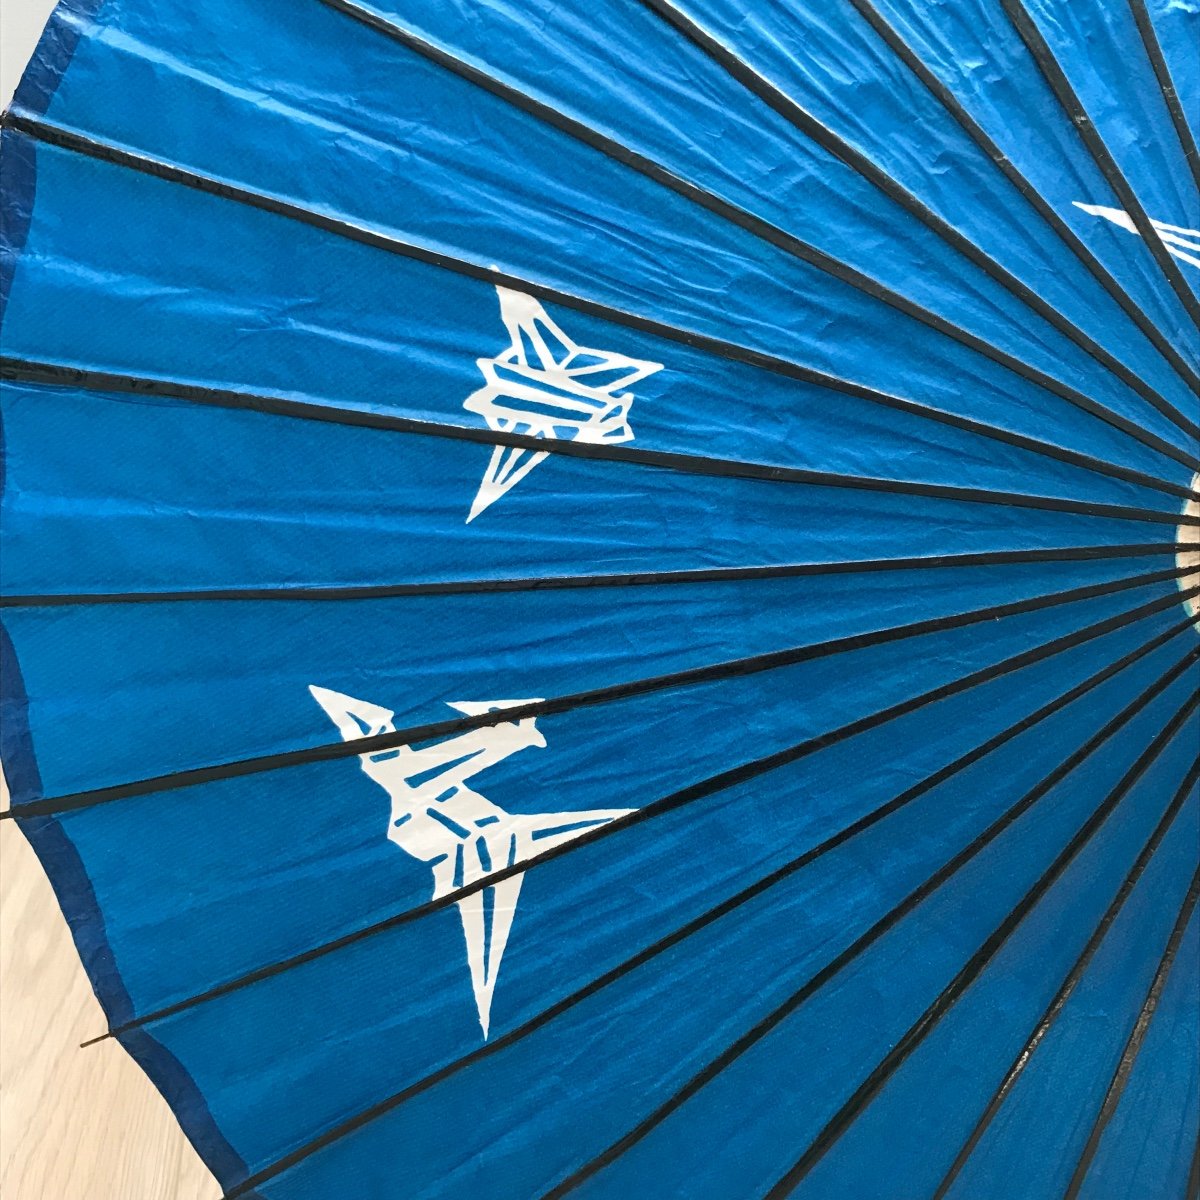 Japanese Umbrella In Blue Washi Paper And Origami - Japan-photo-4